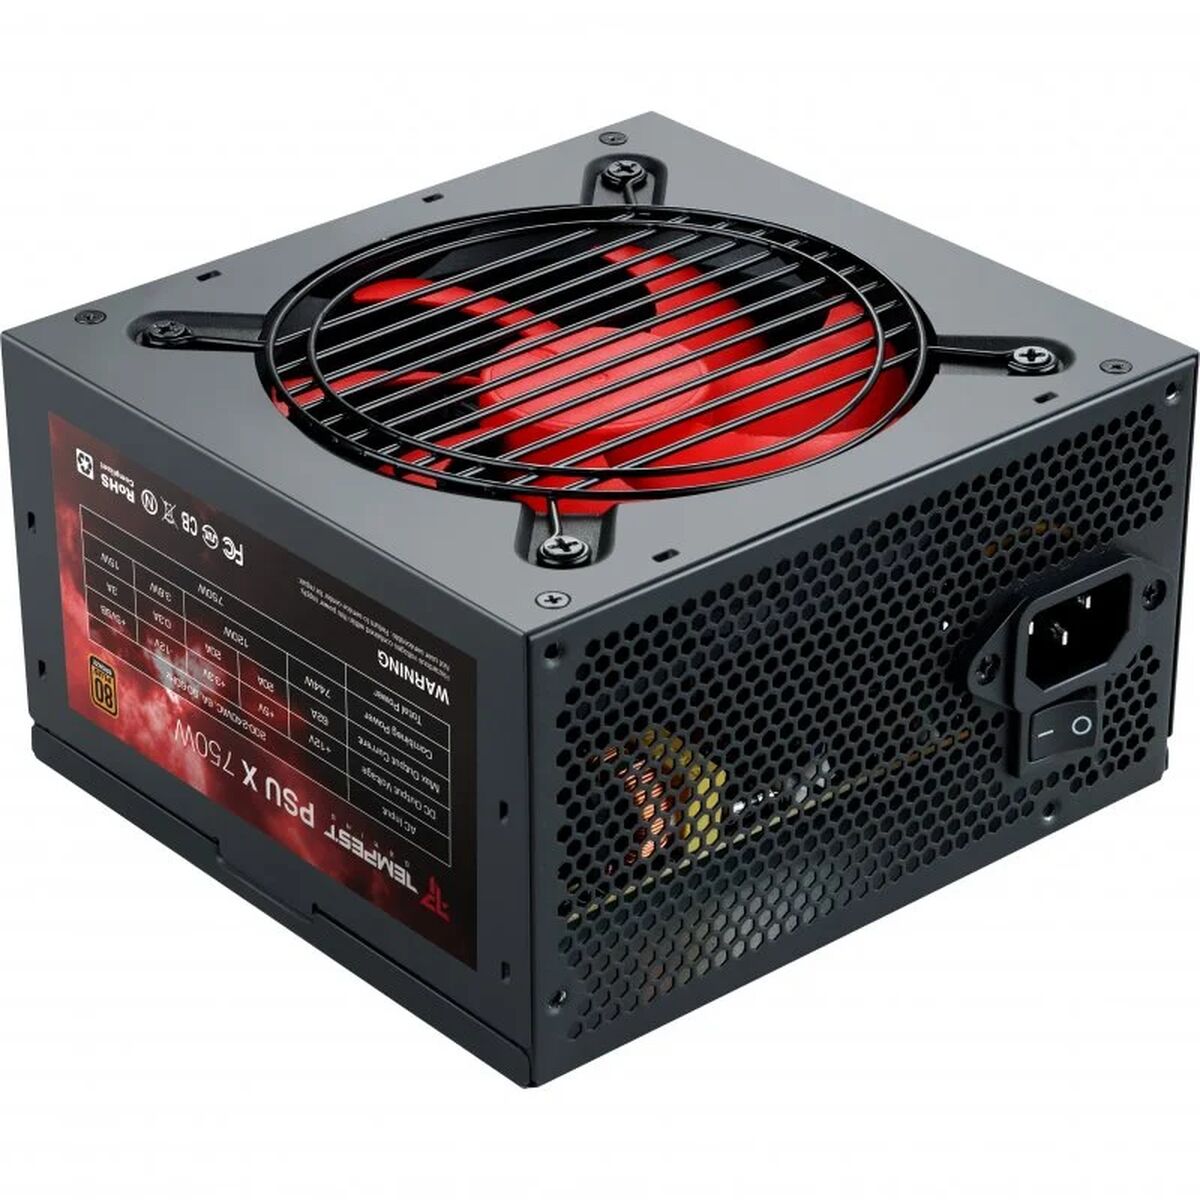 Source d'alimentation Gaming Tempest PSU X 750W